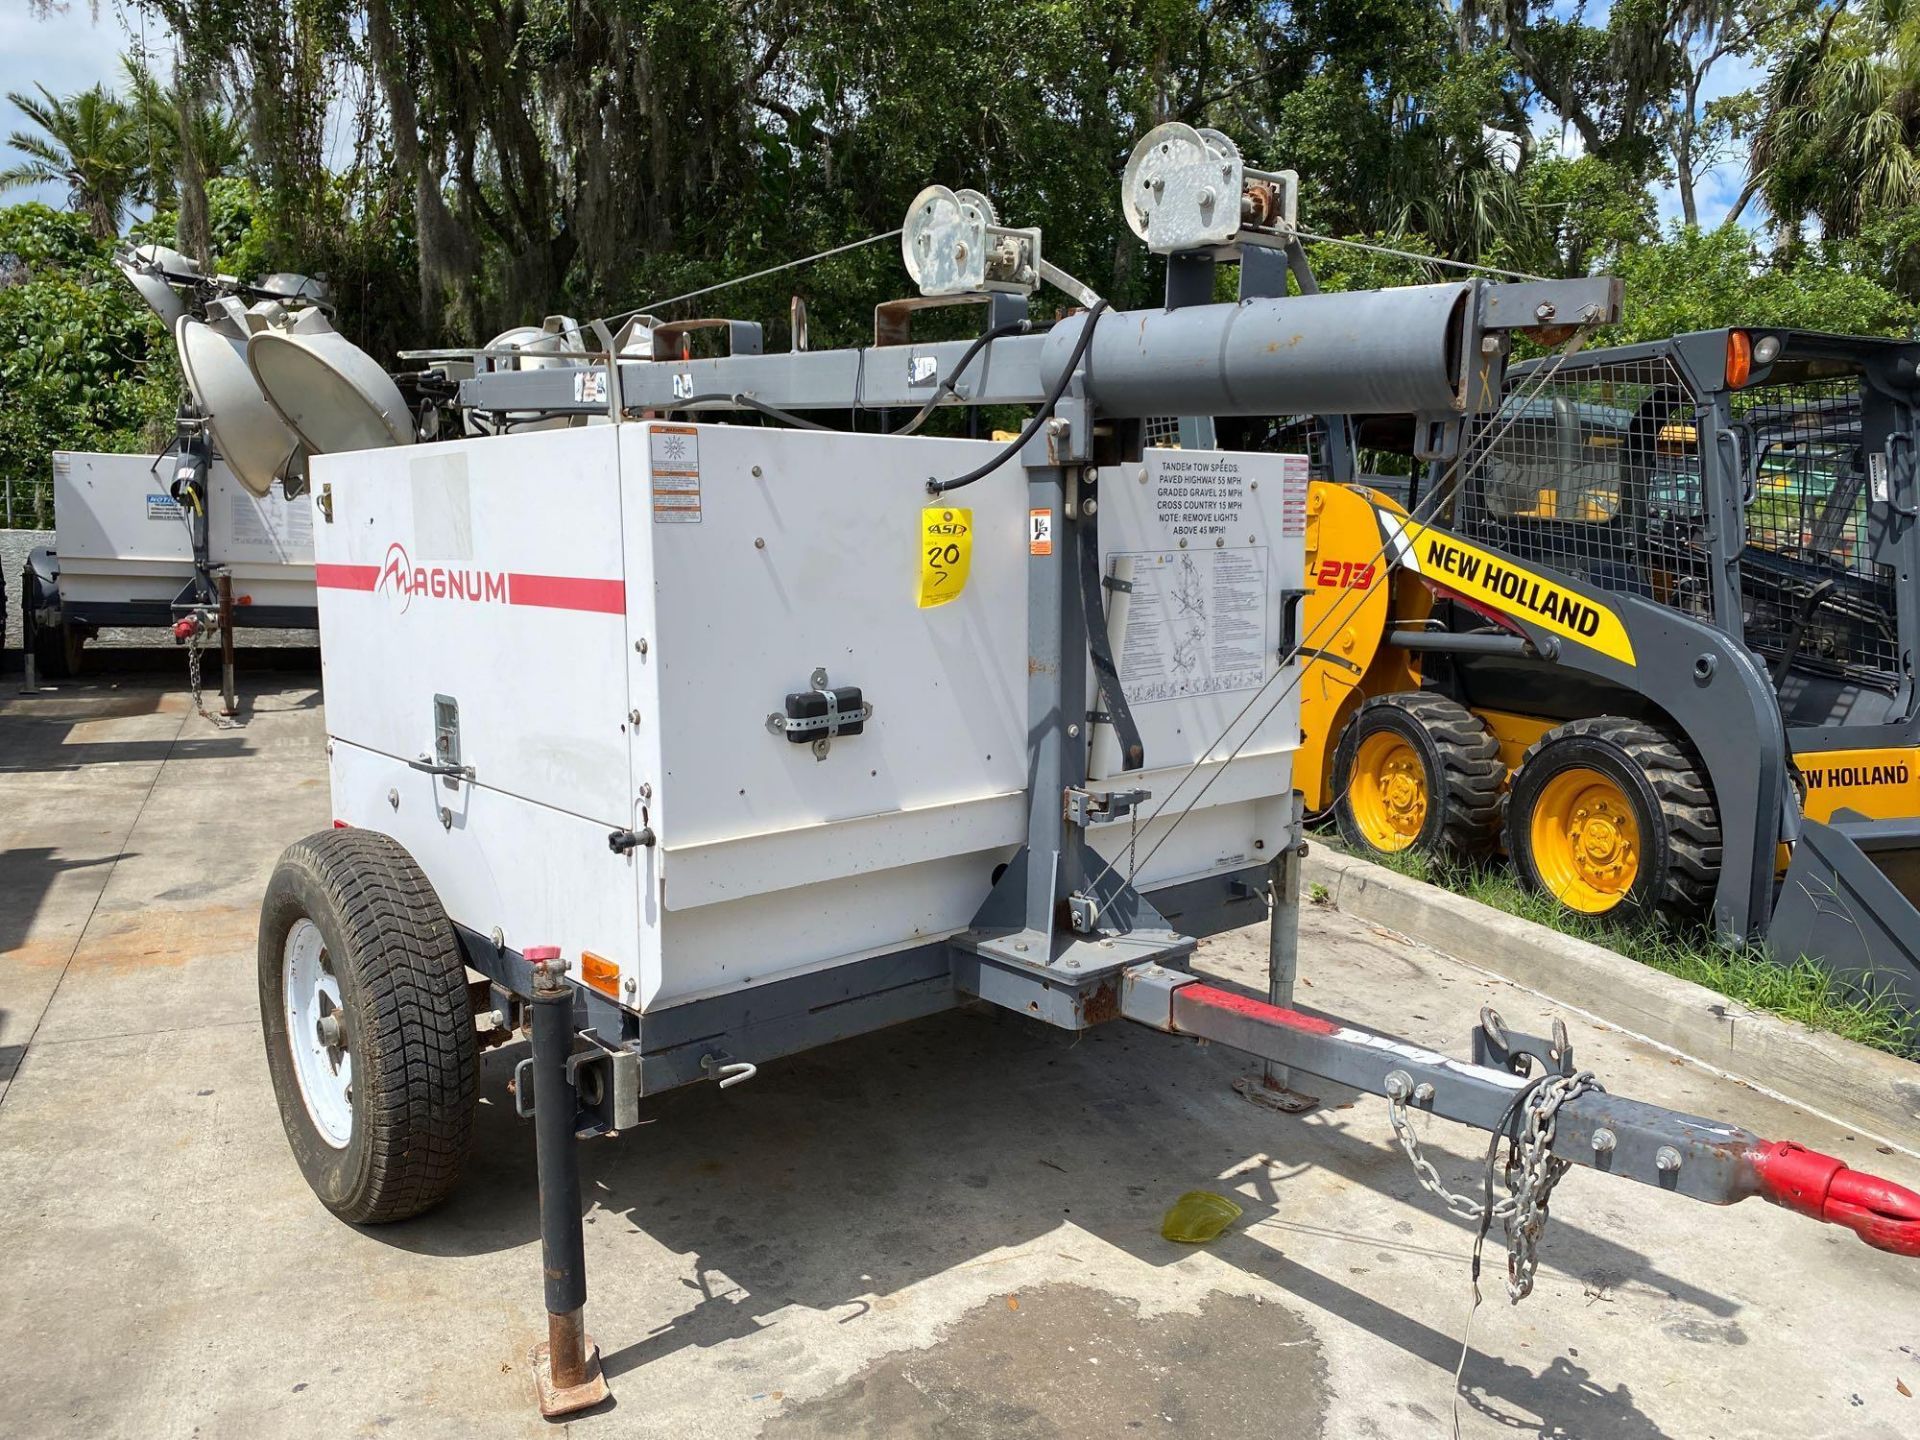 2011 MAGNUM DIESEL LIGHT TOWER/GENERATOR, 6KW, LARGE CAPACITY FUEL TANK, TRAILER MOUNTED, RUNS AND O